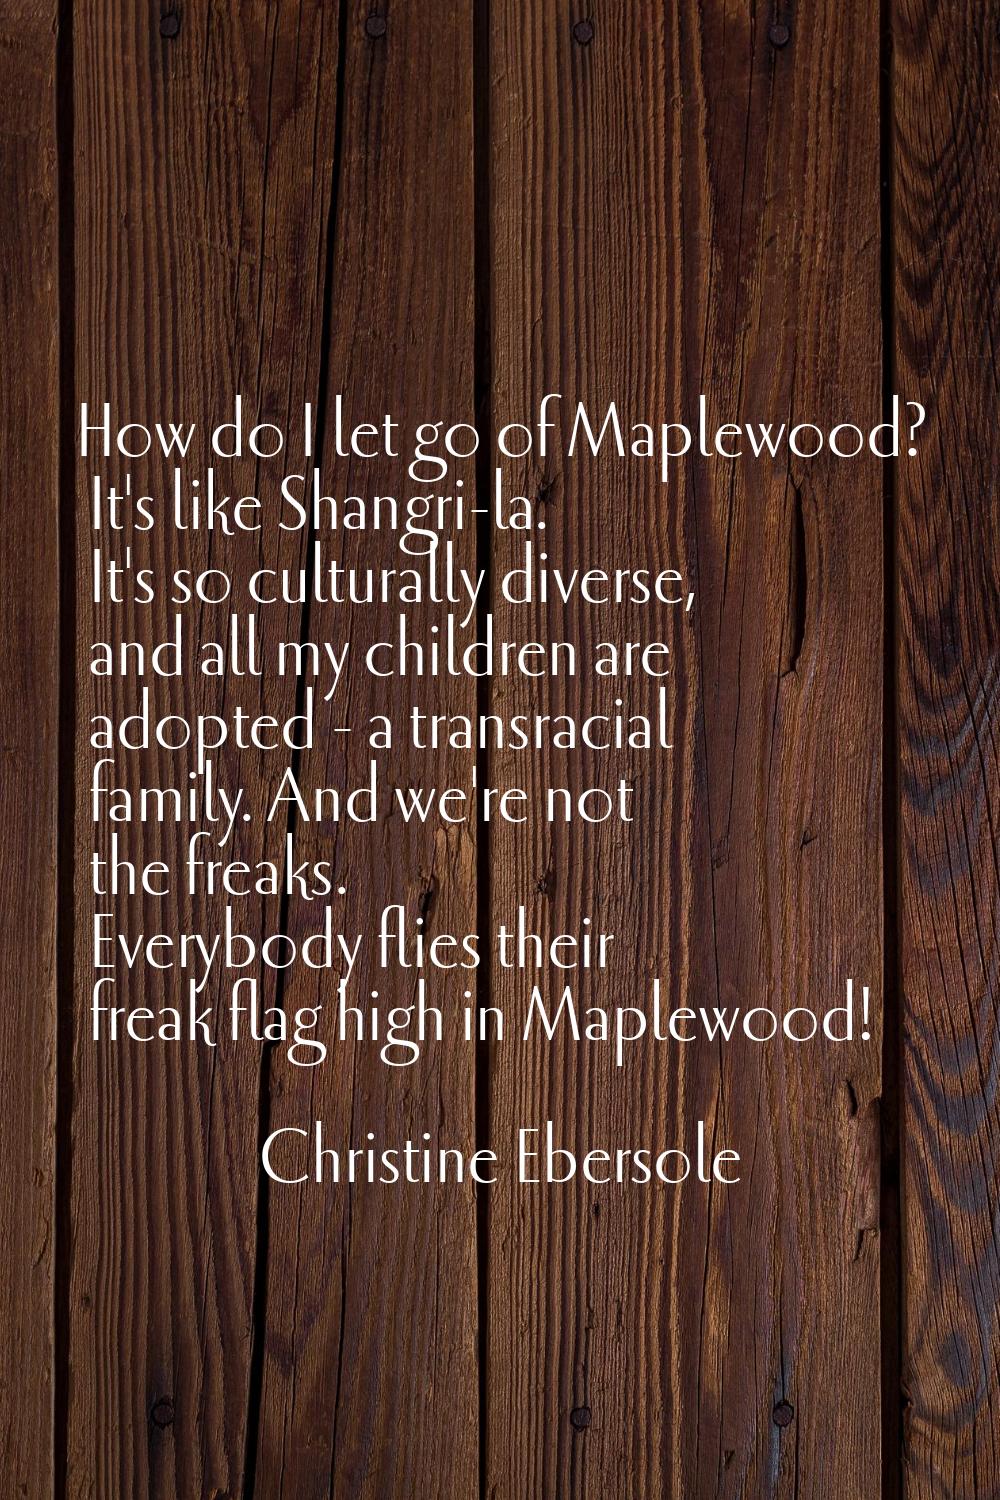 How do I let go of Maplewood? It's like Shangri-la. It's so culturally diverse, and all my children